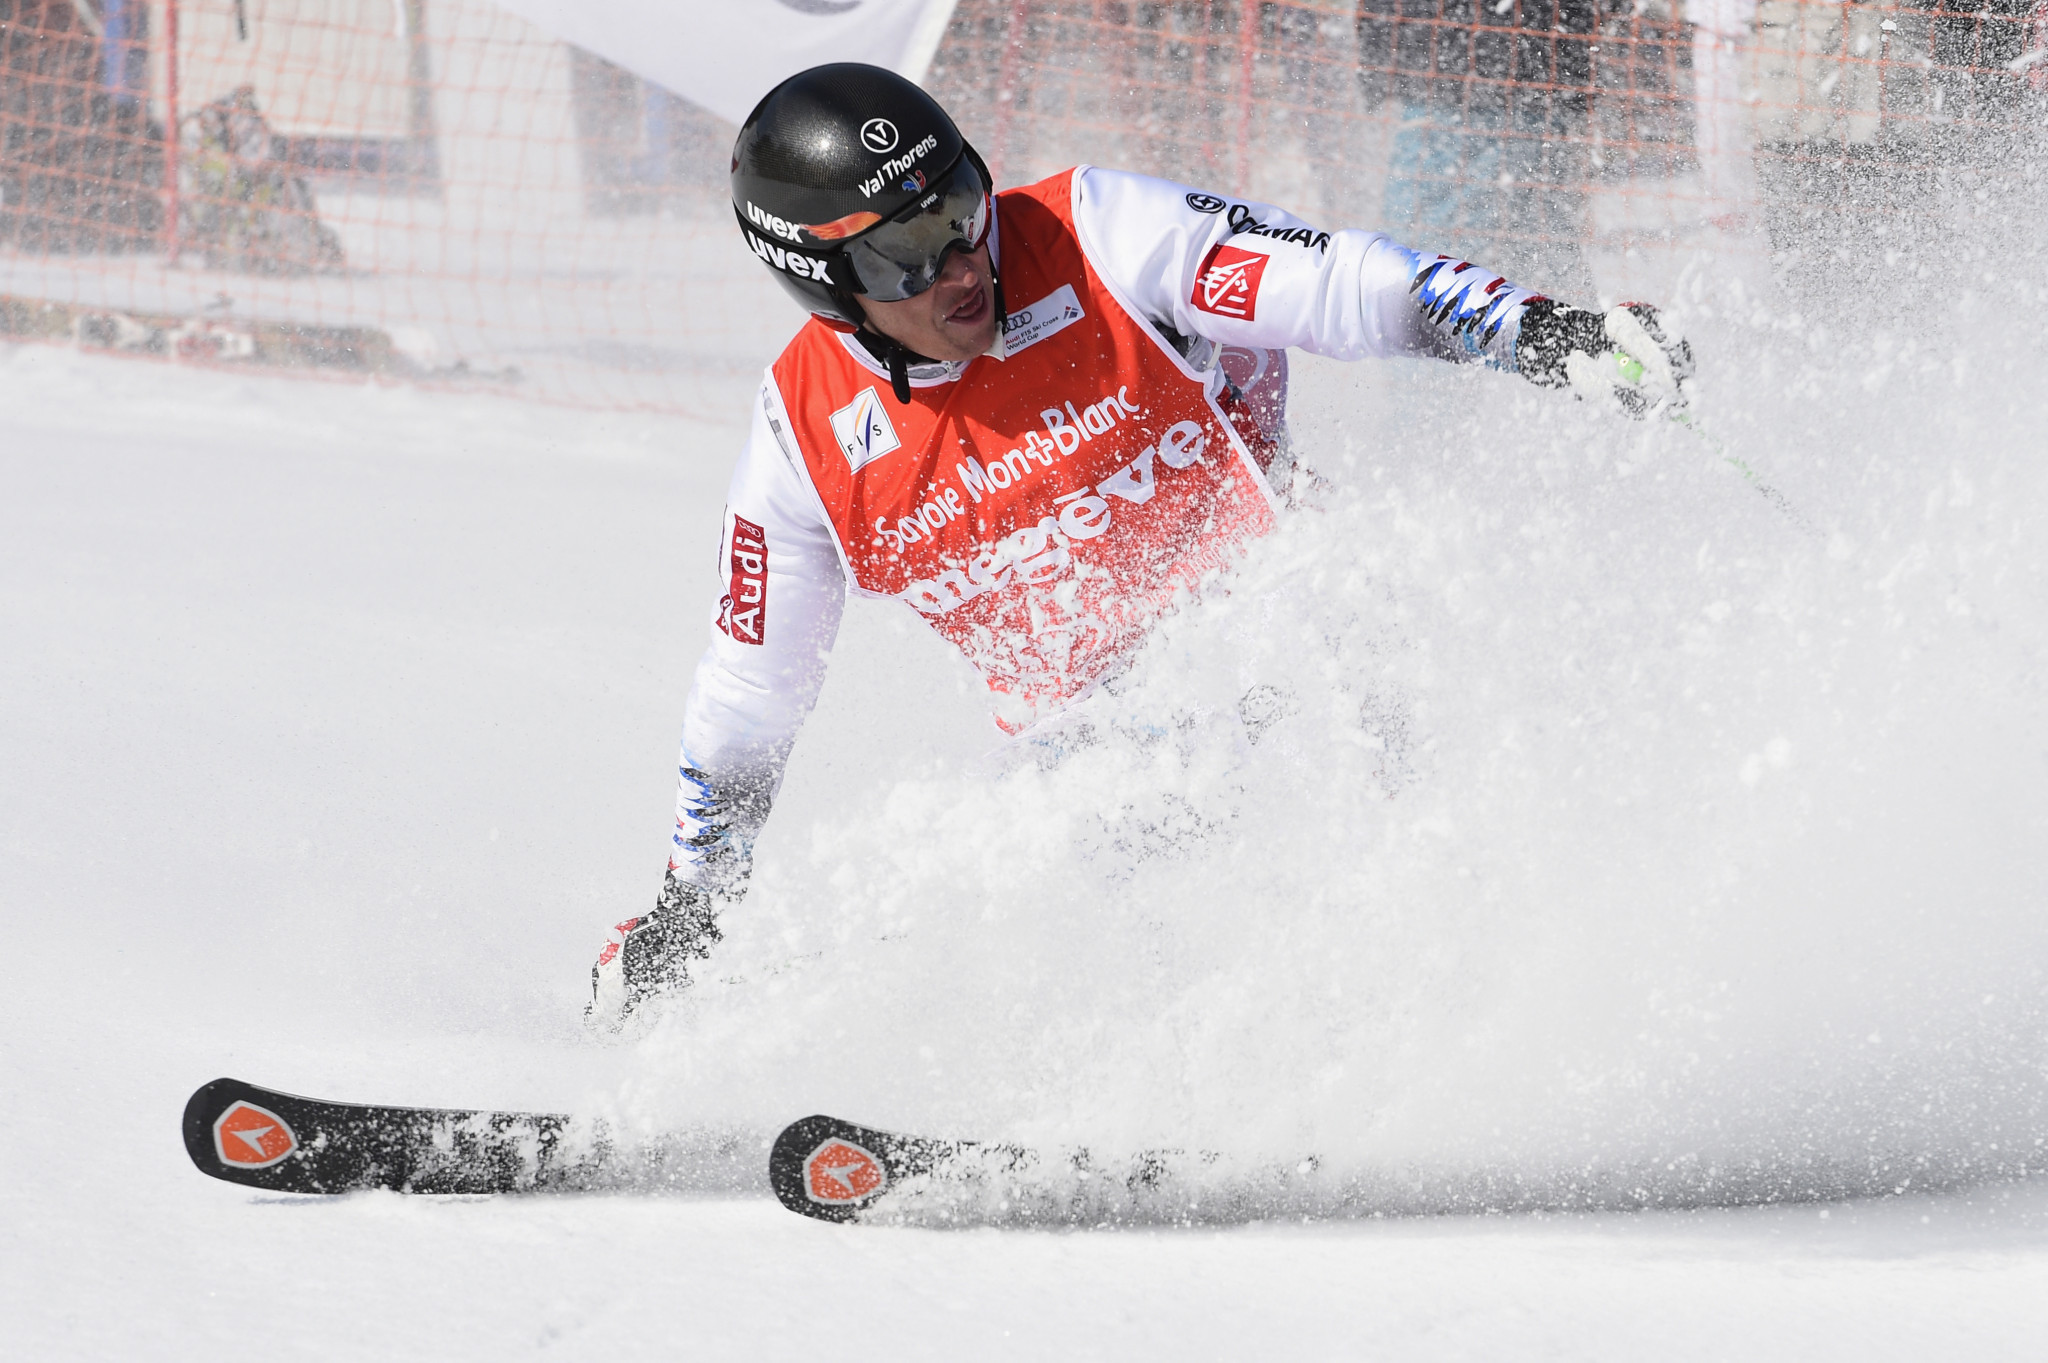 Chapuis aims for home success to begin Ski Cross World Cup defence